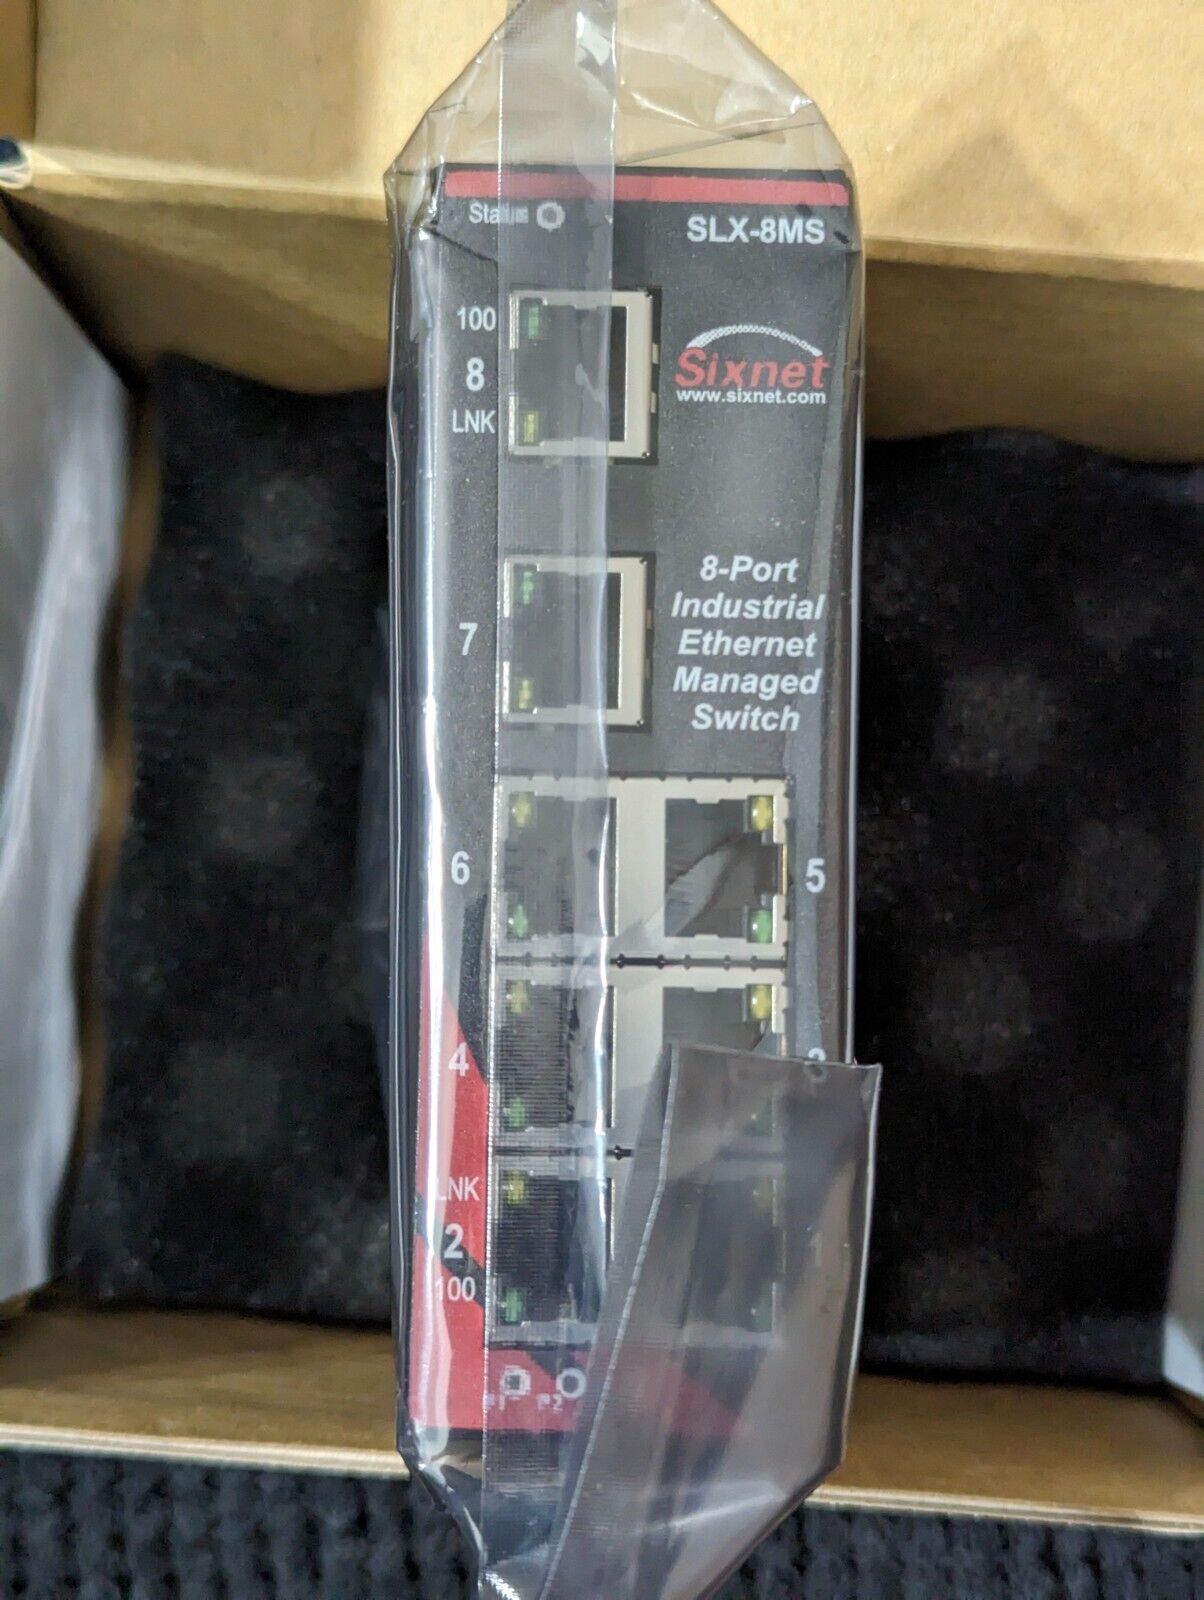 Red Lion Sixnet SLX-8MS-1 8-Port Industrial Ethernet Managed Switch - BRAND NEW